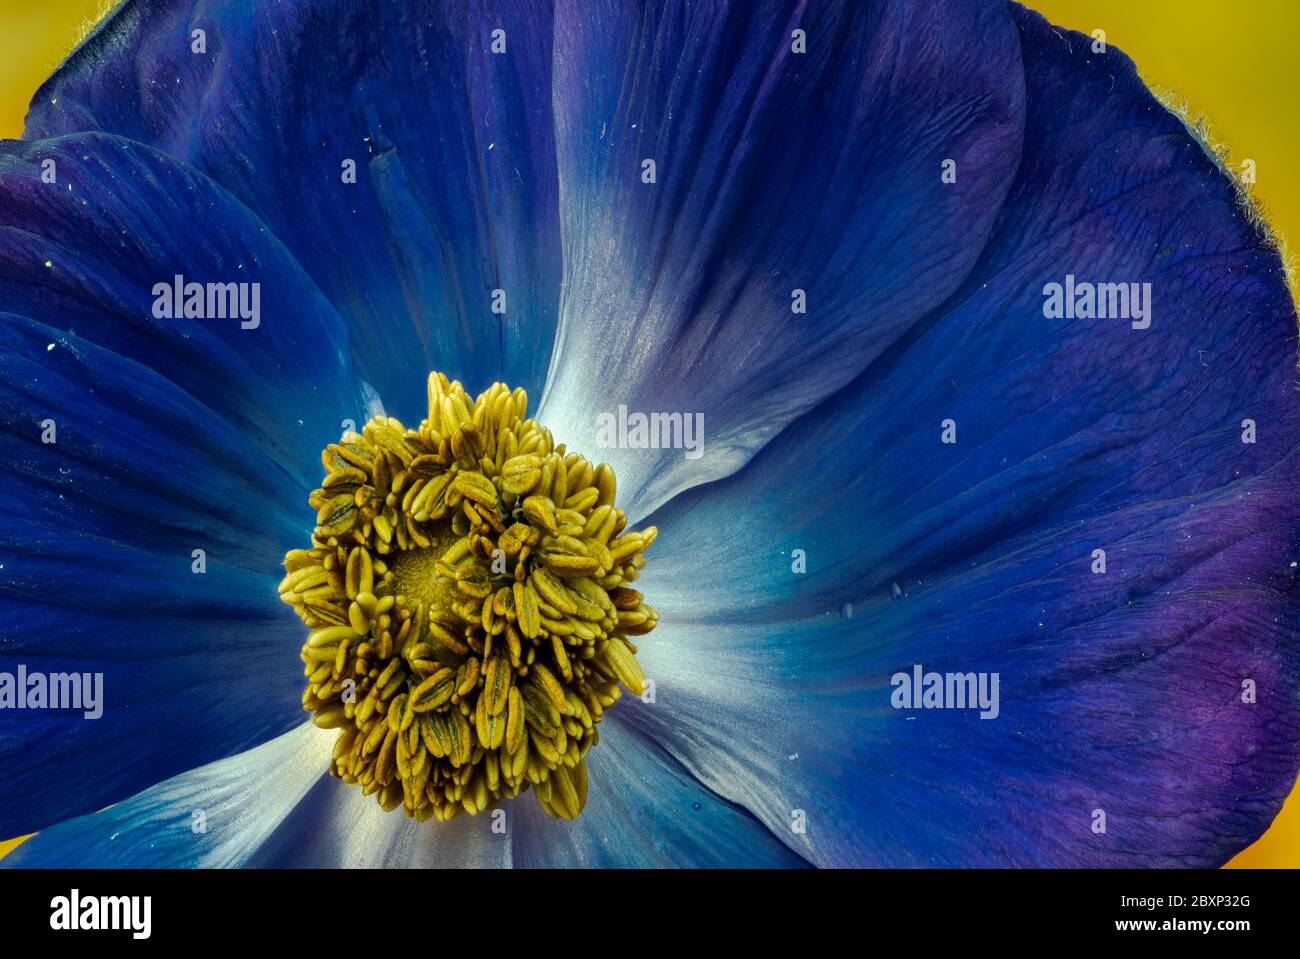 Isolated single deep blue anemone blossom heart macro on blurred natural background Stock Photo